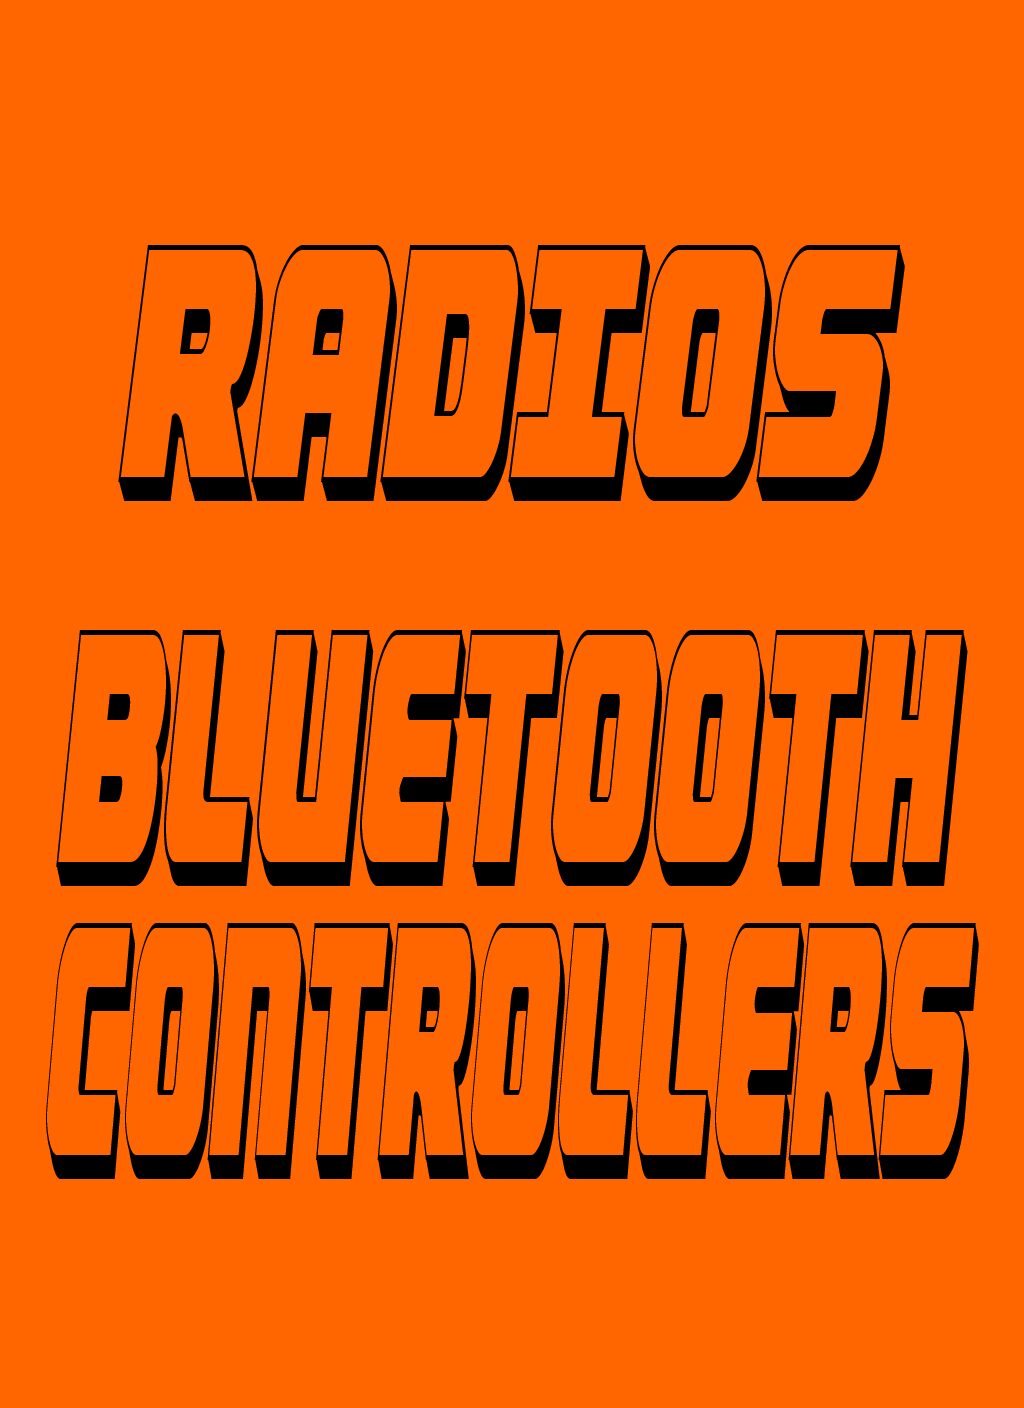 RADIO AND BLUETOOTH CONTOLLERS